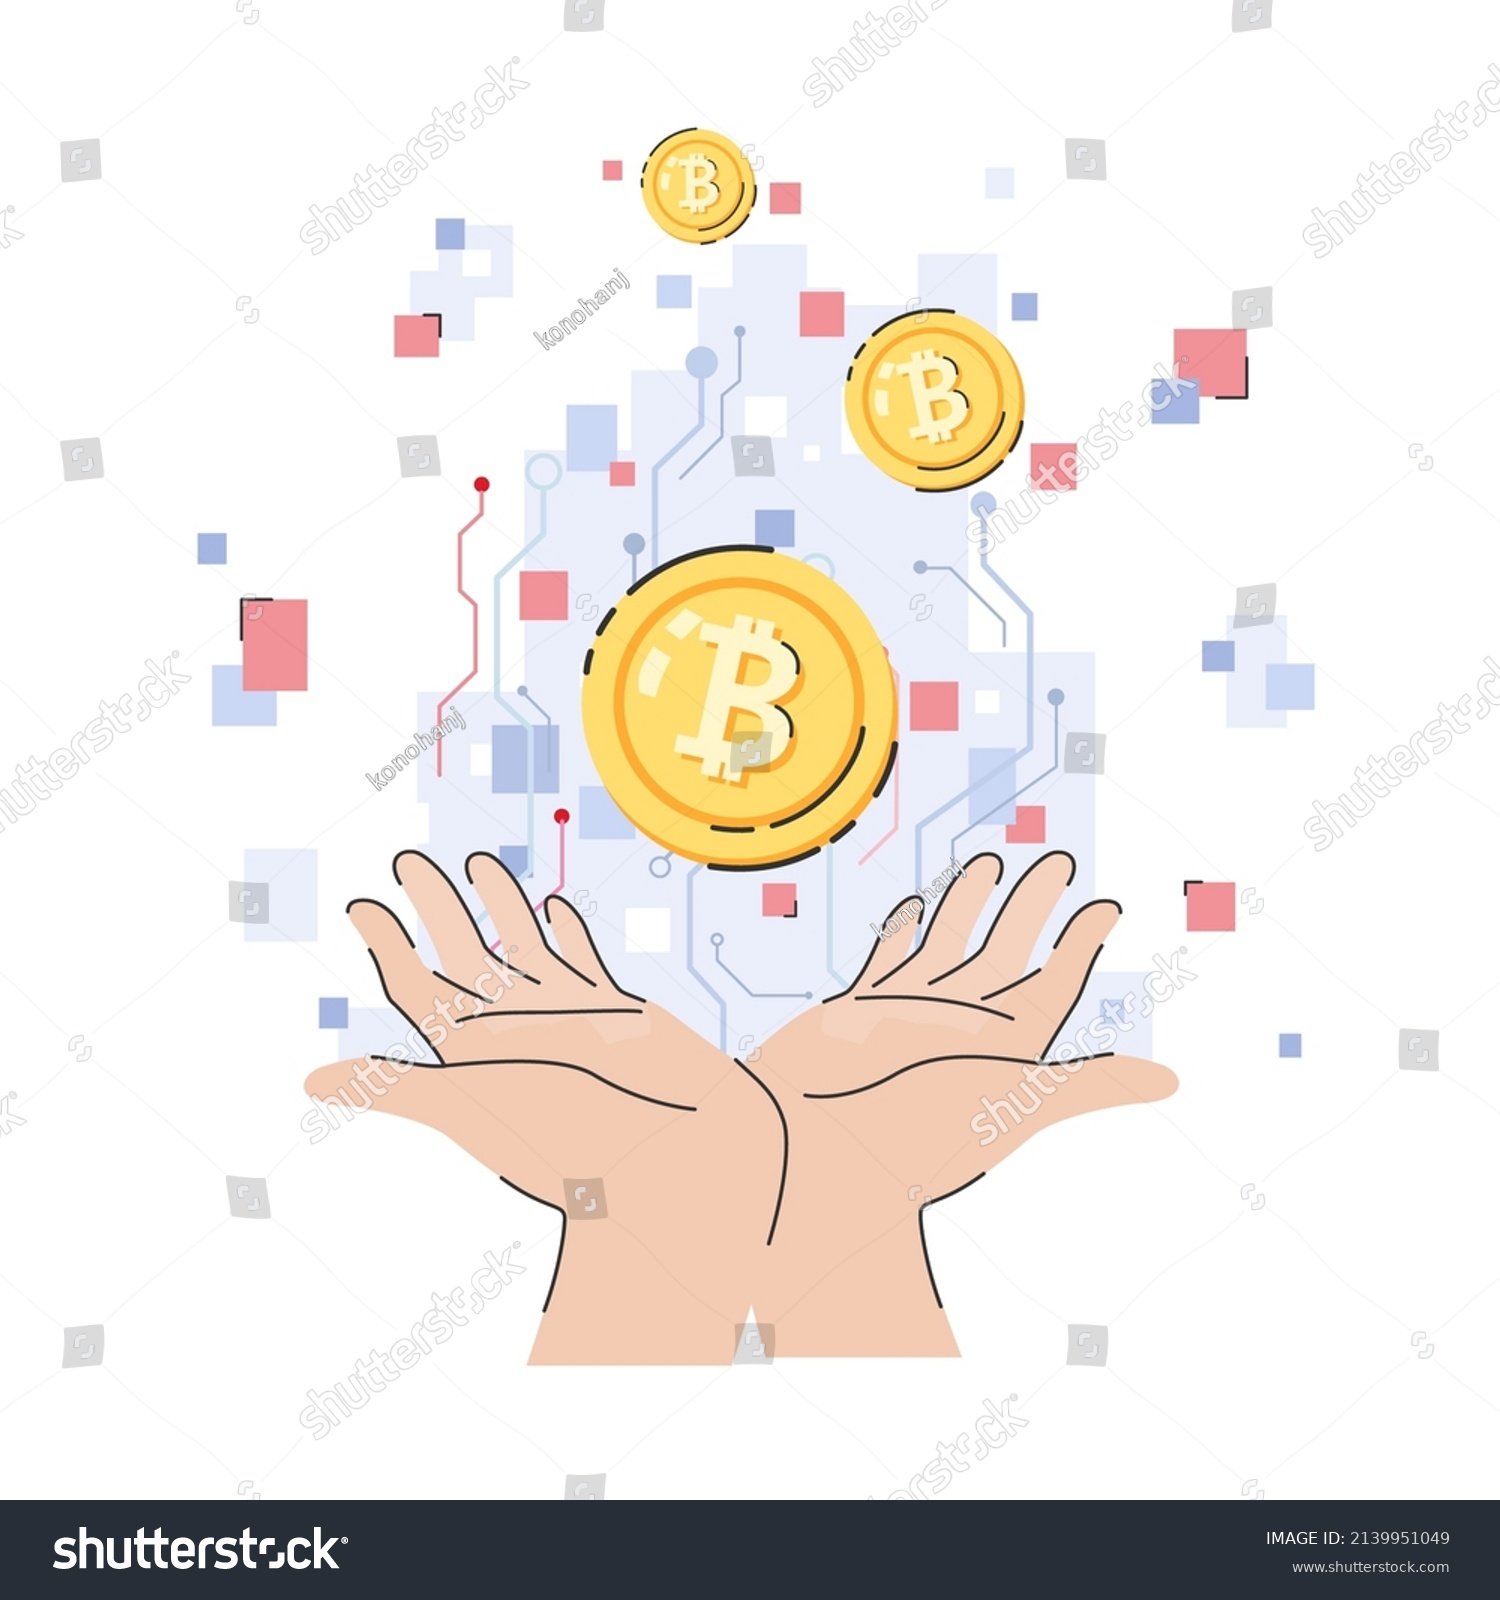 SVG of Two hands holding cryptocurrency coins on digital circuit background cartoon flat vector illustration isolated on white background. Cryptocurrency investment in modern technology concept. svg